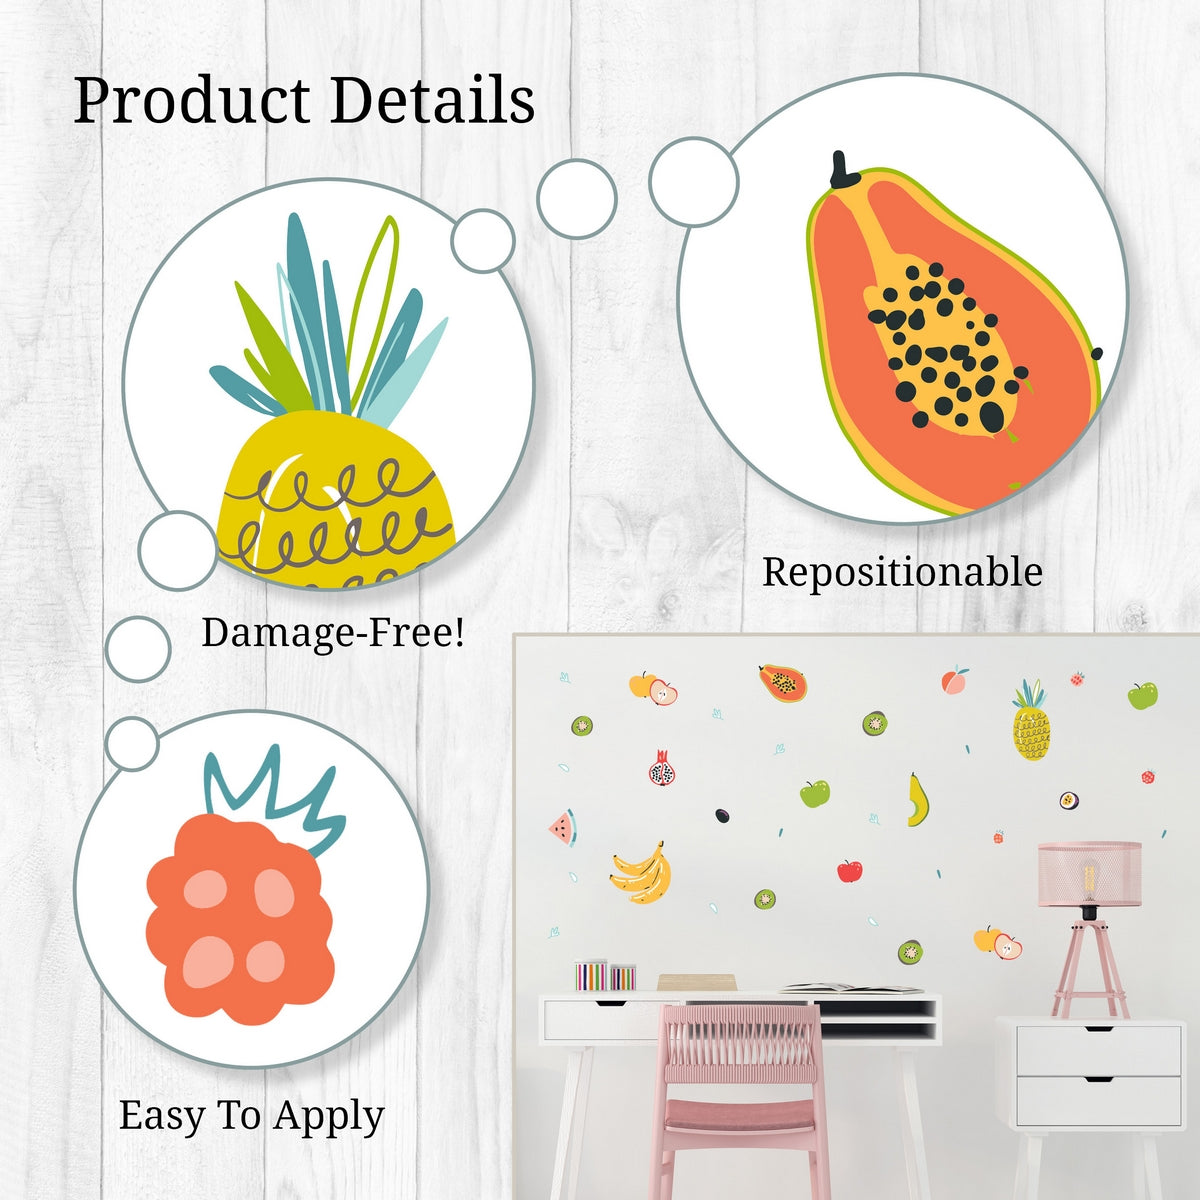 Fruit Variety Wall Decals